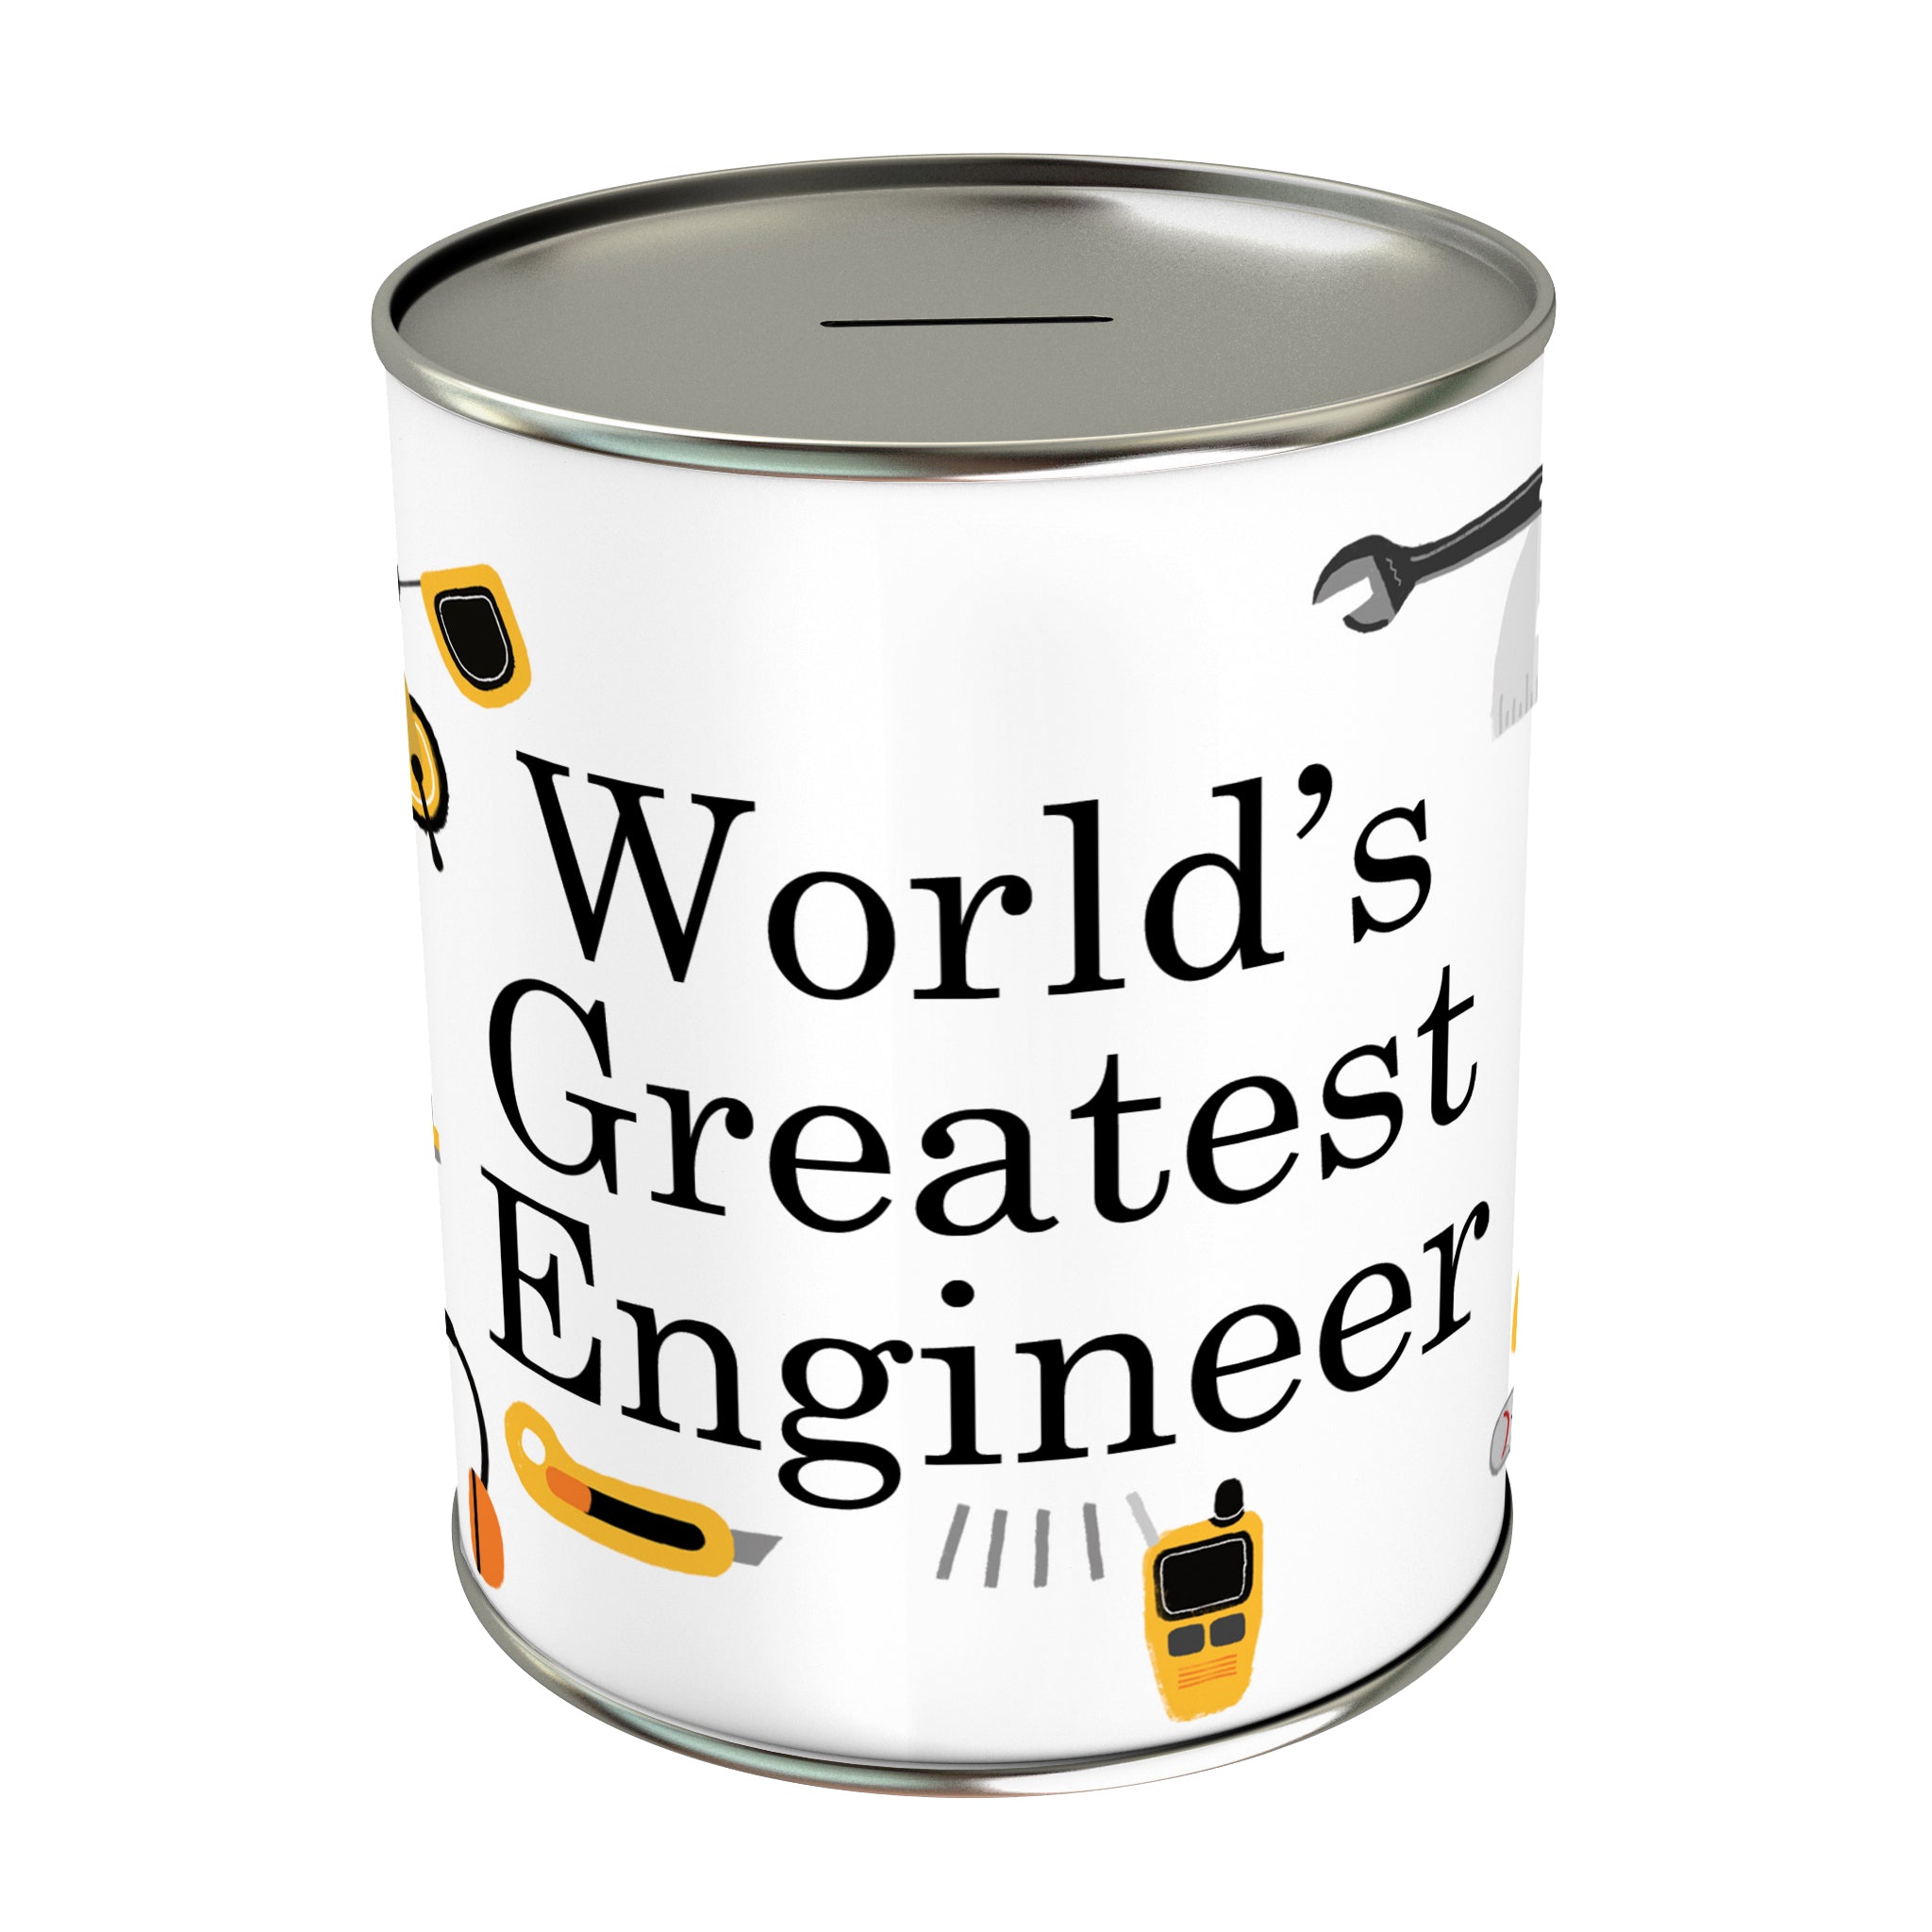 World's Greatest Engineer Coin Bank